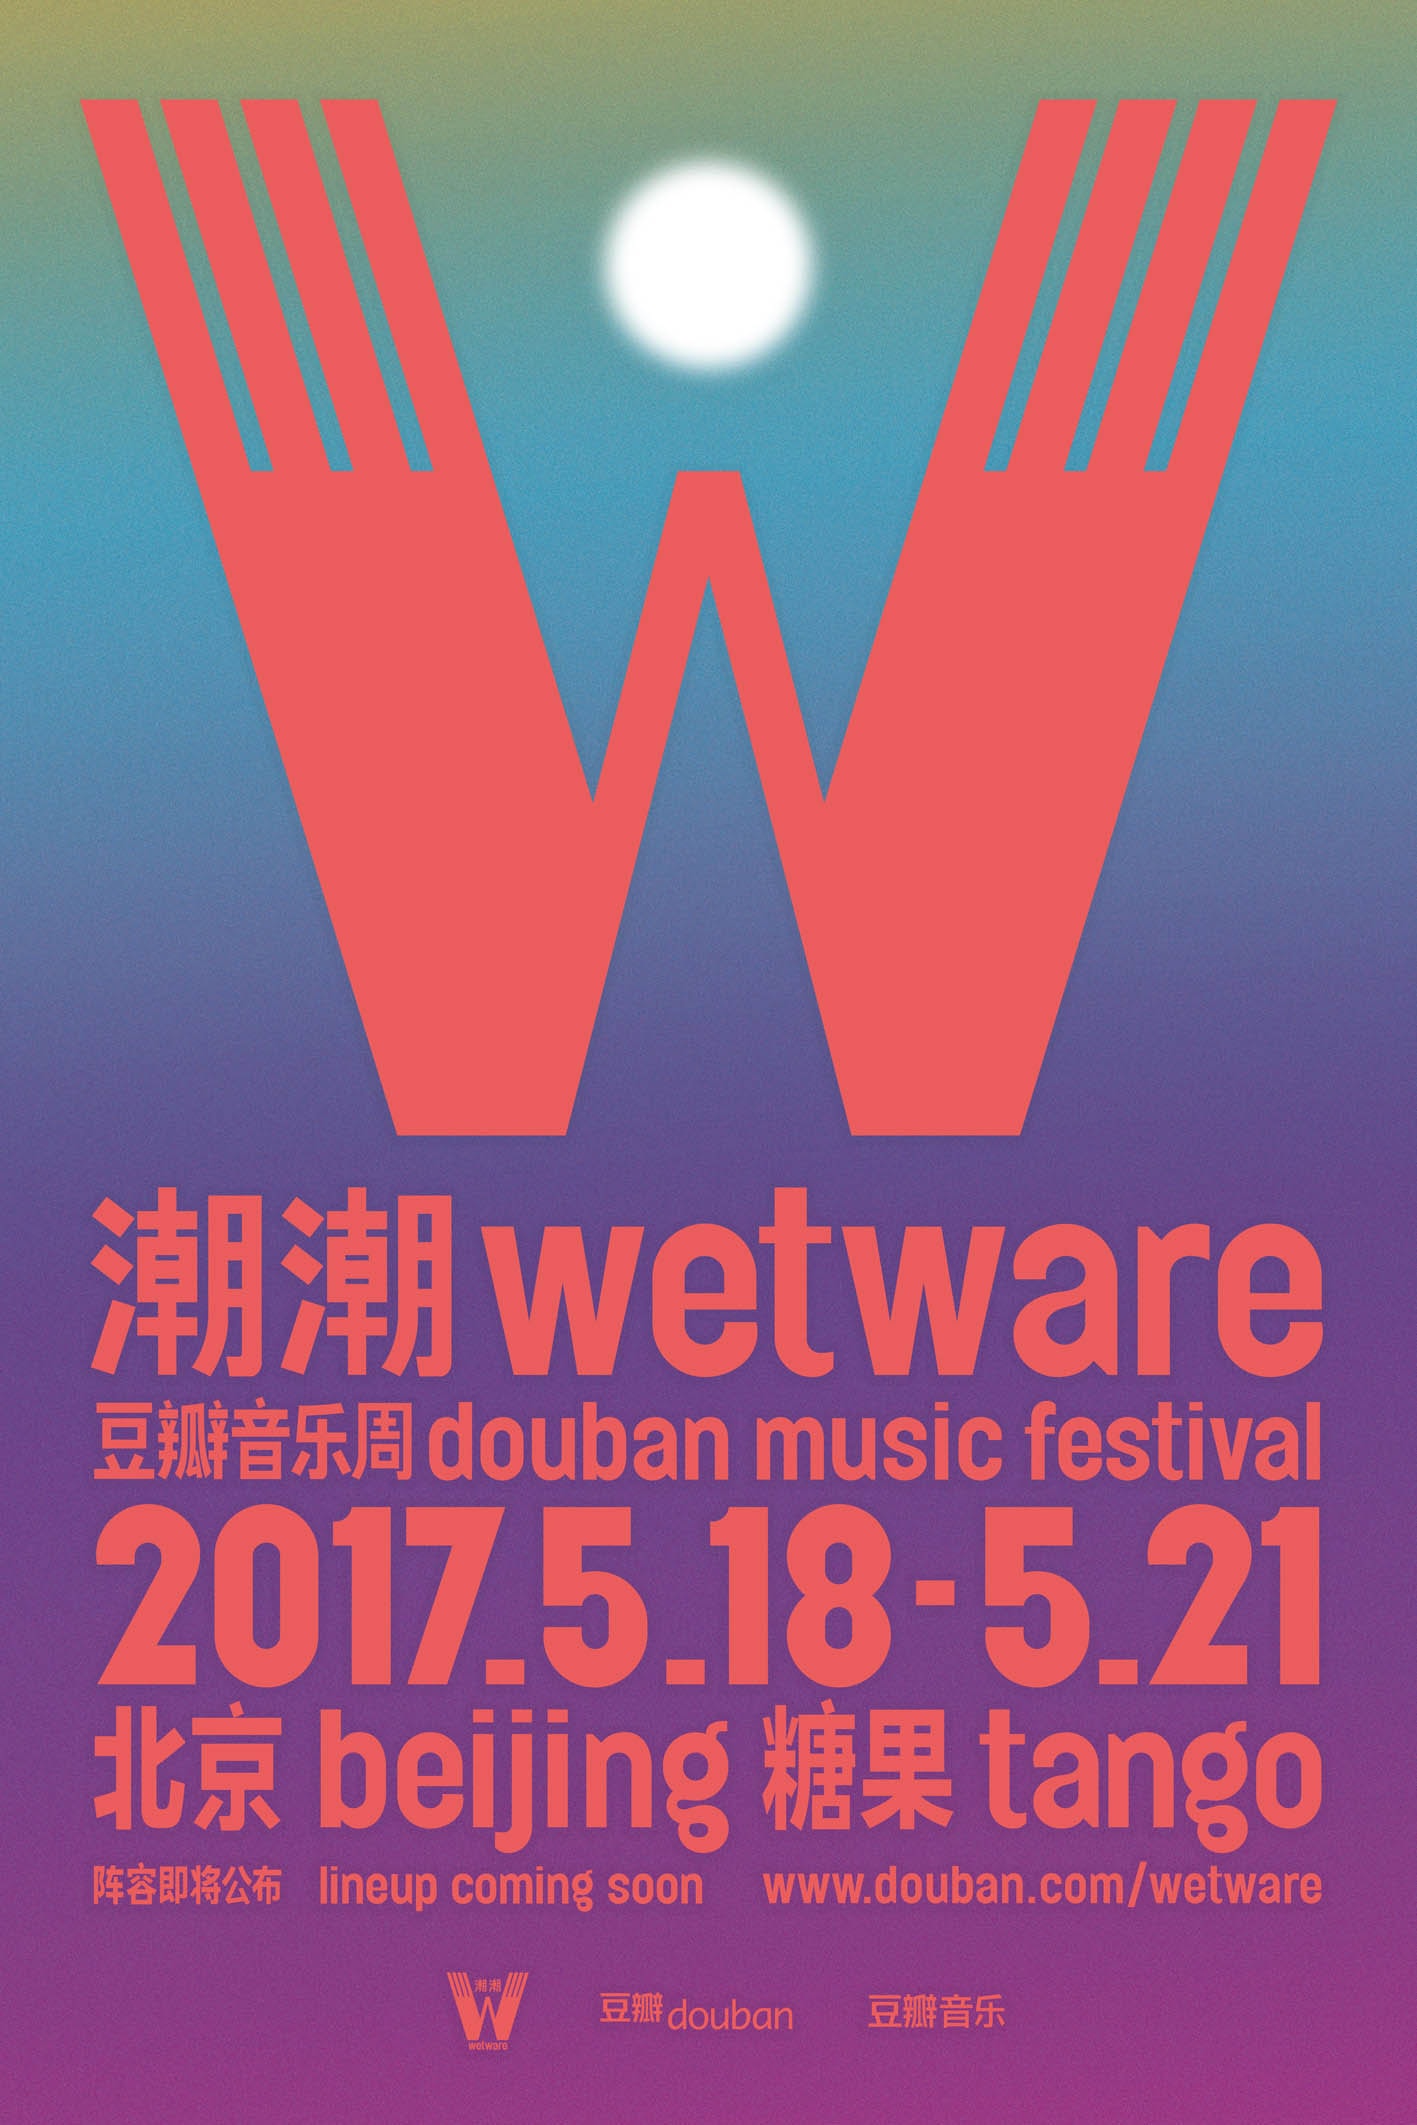 Douban wetware music festival will be coming on may